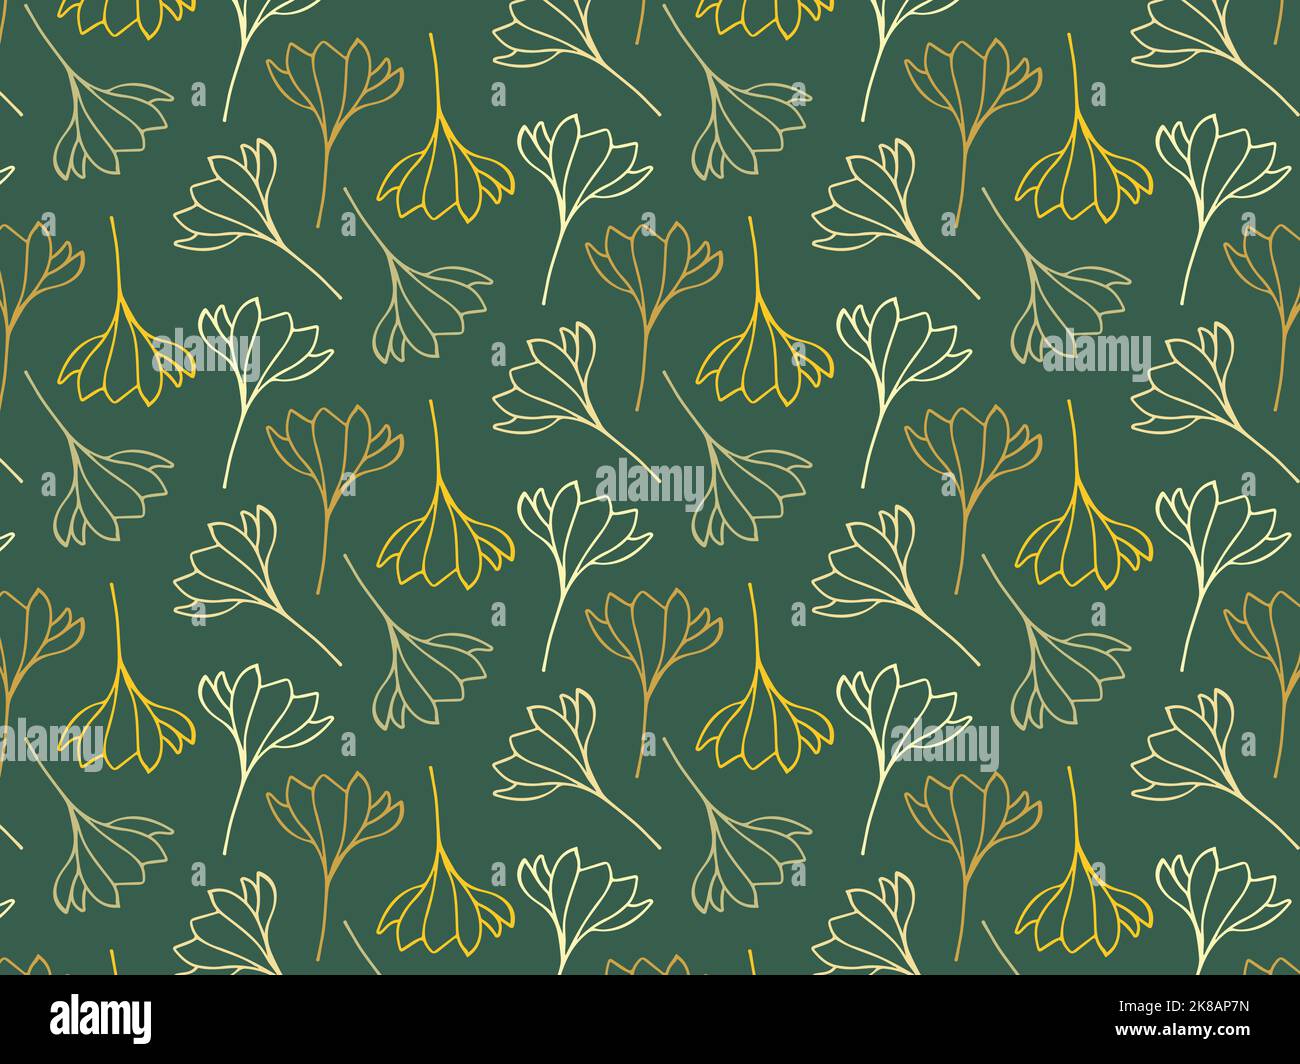 Floral pattern on green background Stock Vector